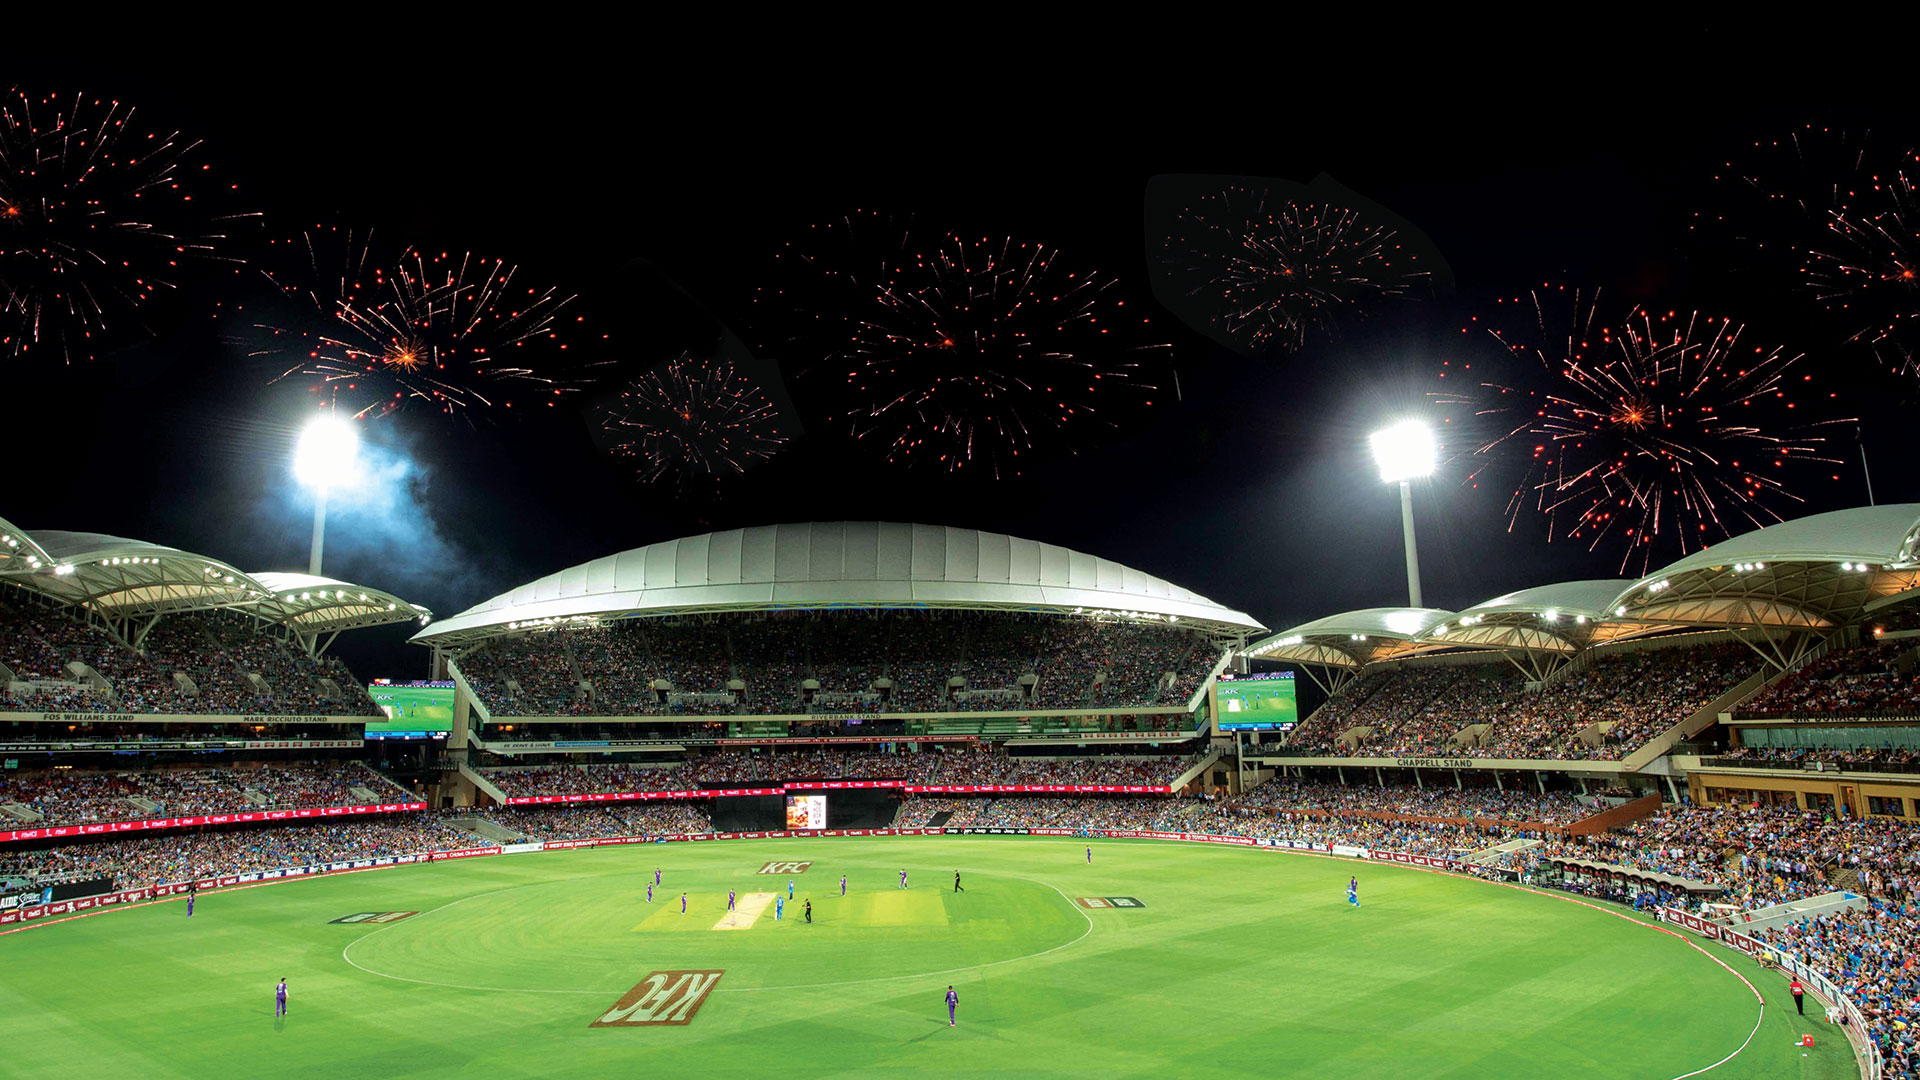 Fireworks over a BBL Match at Adelaide Oval